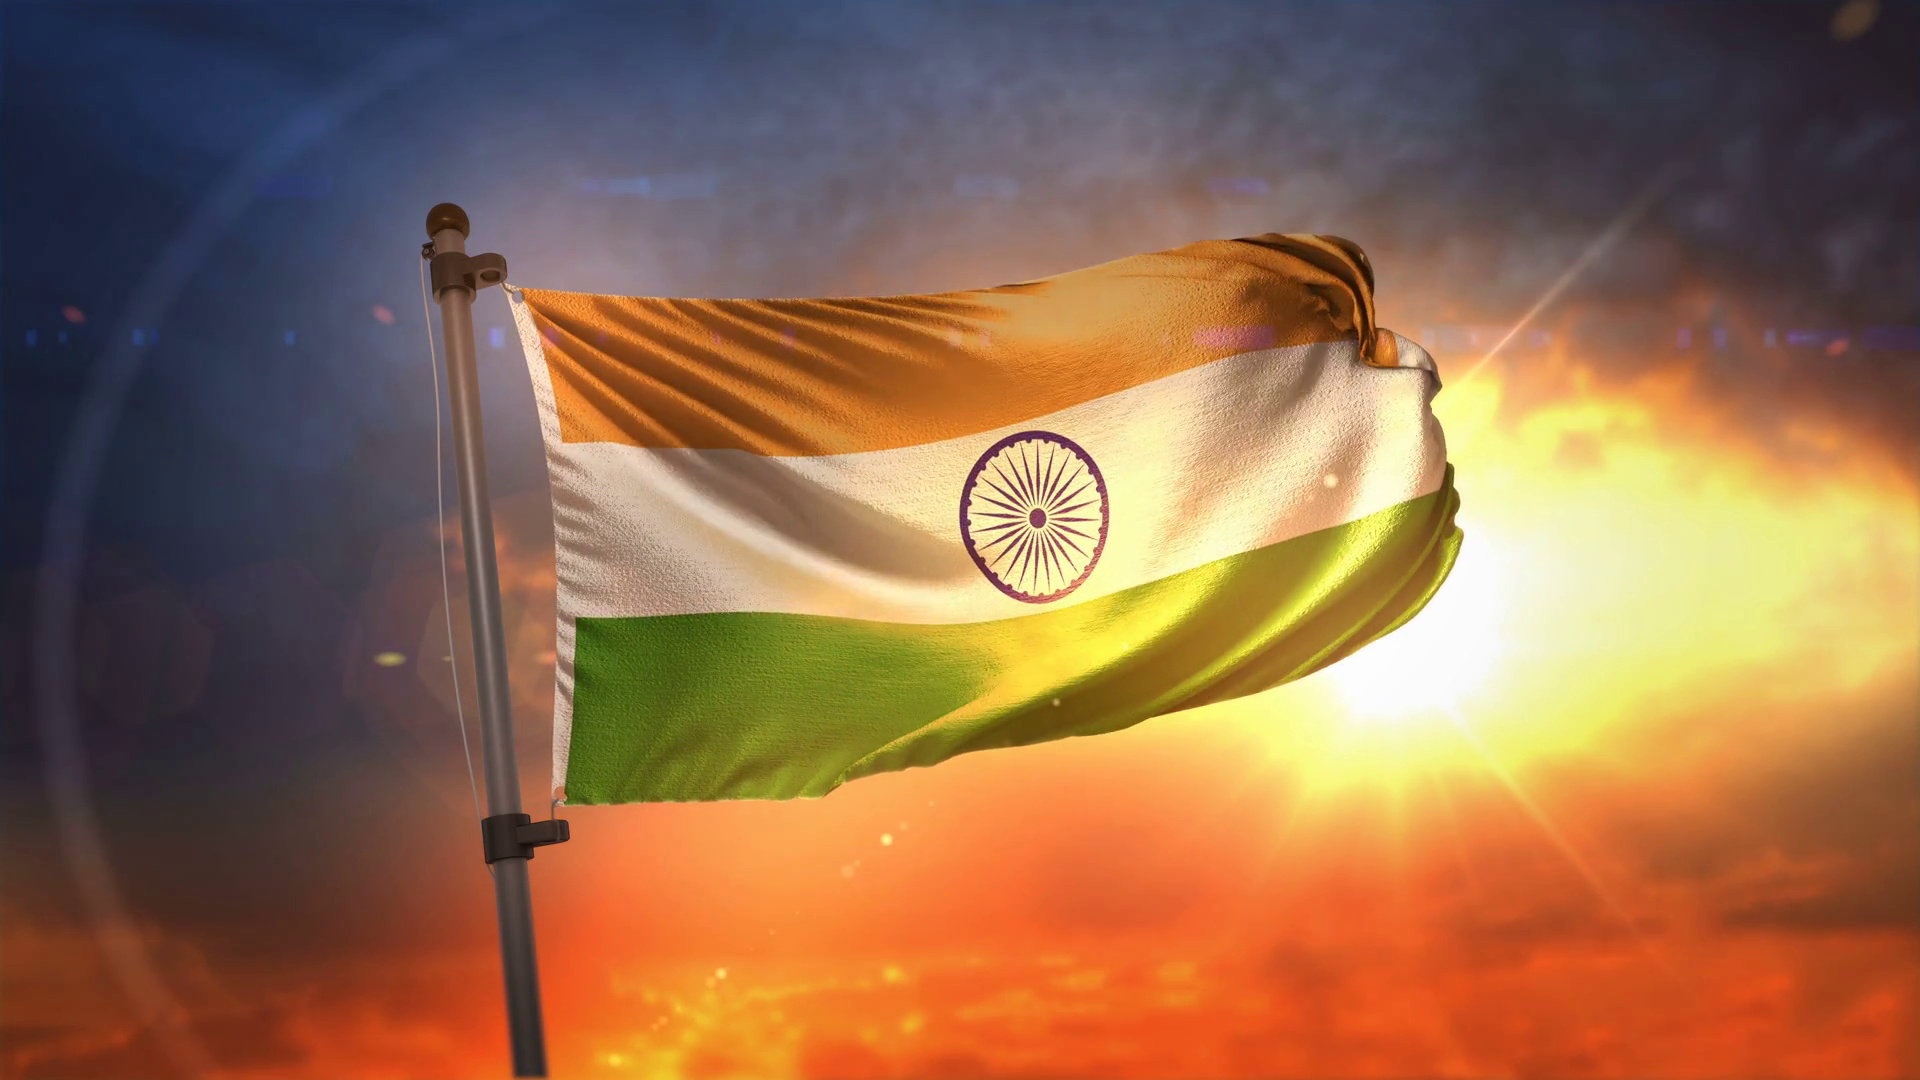 Flag of India, Indian flag HD wallpapers, Patriotic backgrounds, National pride, 1920x1080 Full HD Desktop